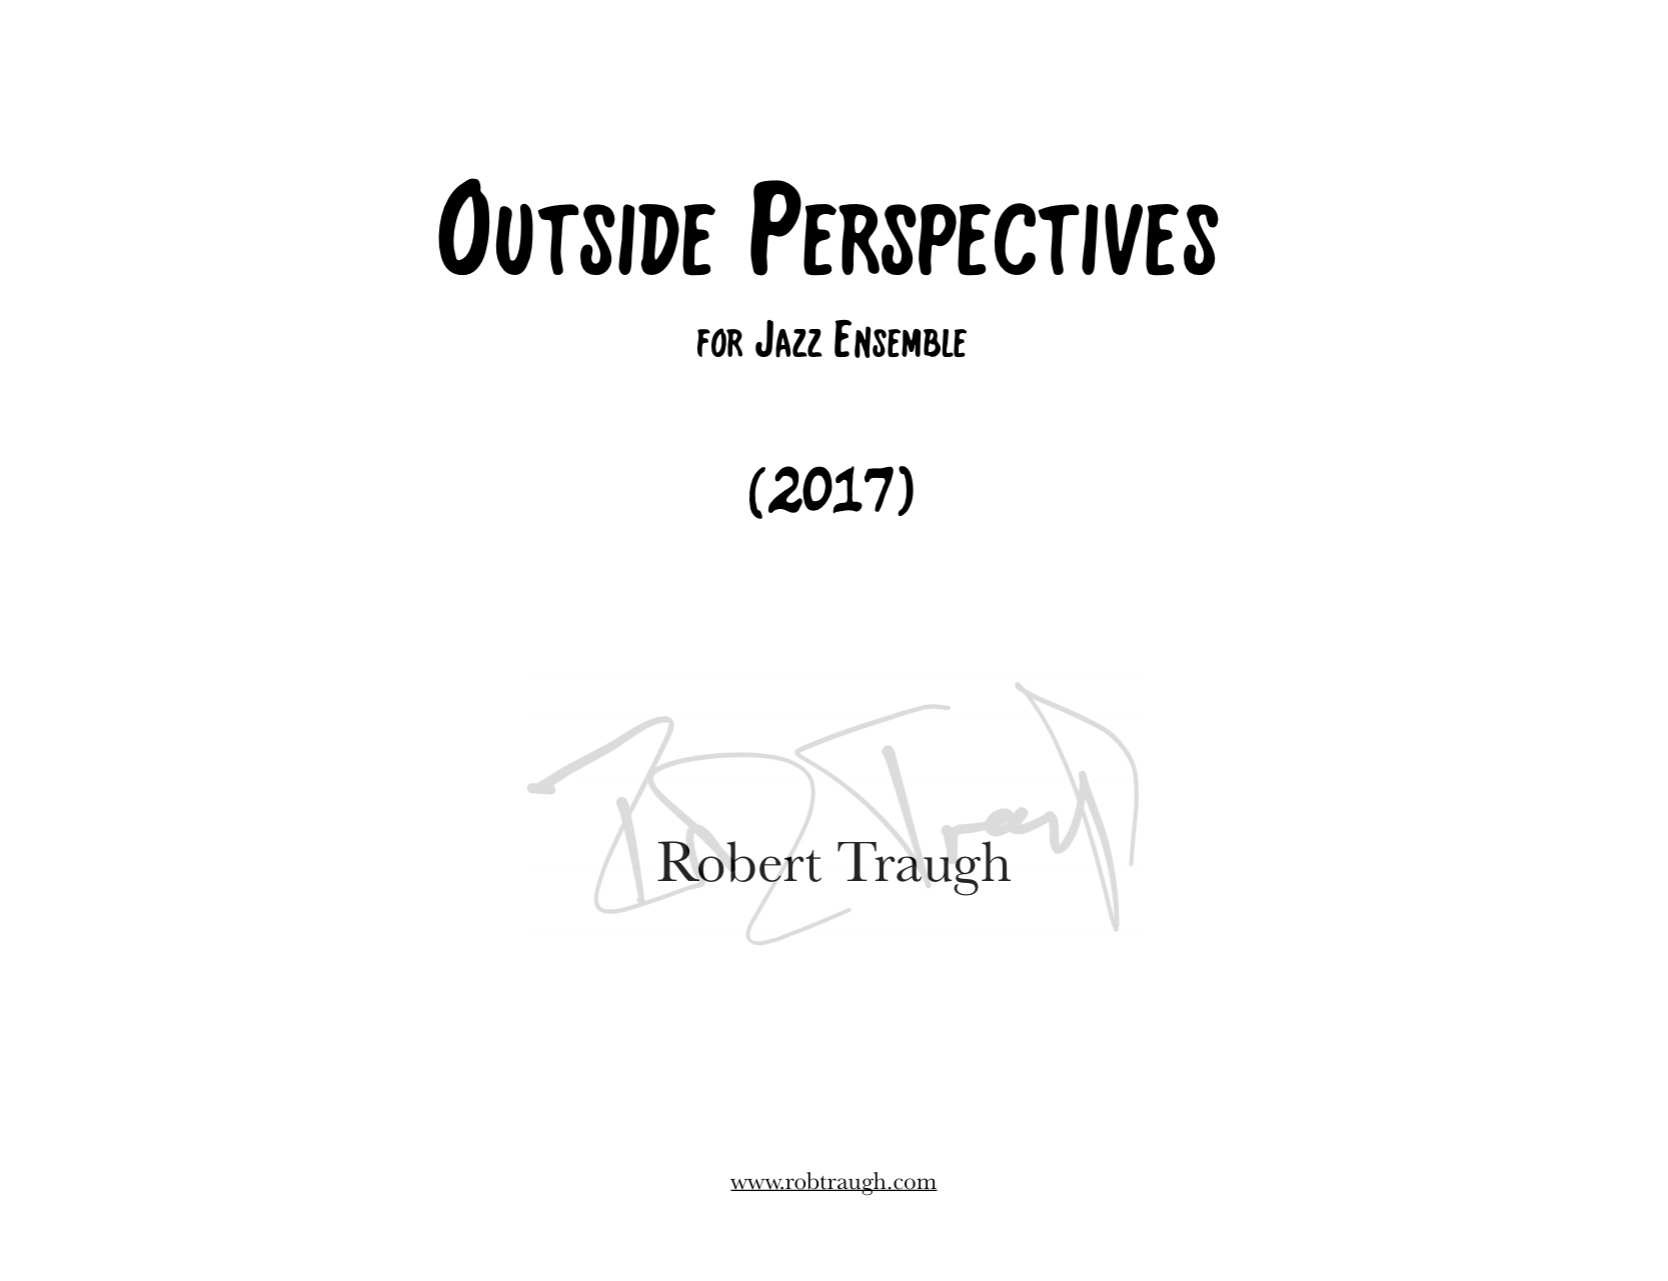 Outside Perspectives by Rob Traugh